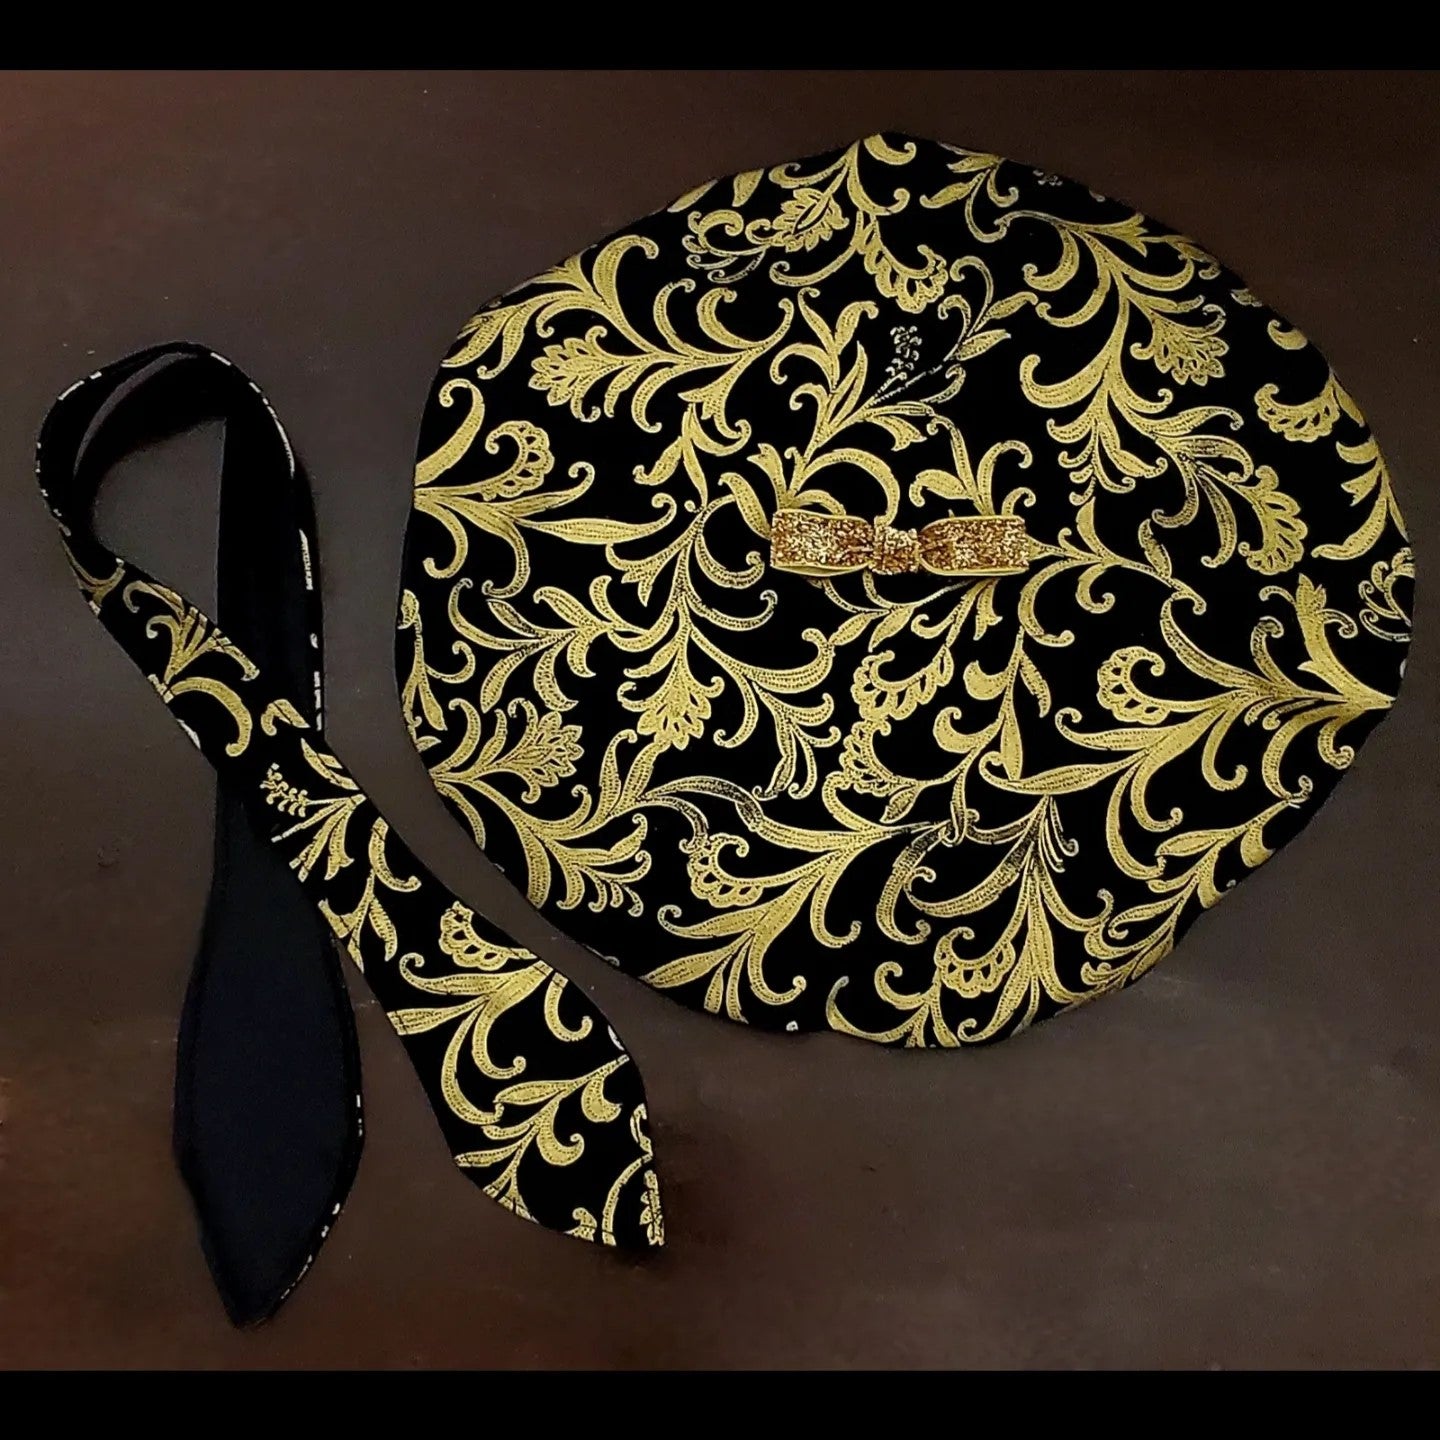 Black and gold damask printed beret with bow detail and matching scarf on brown background